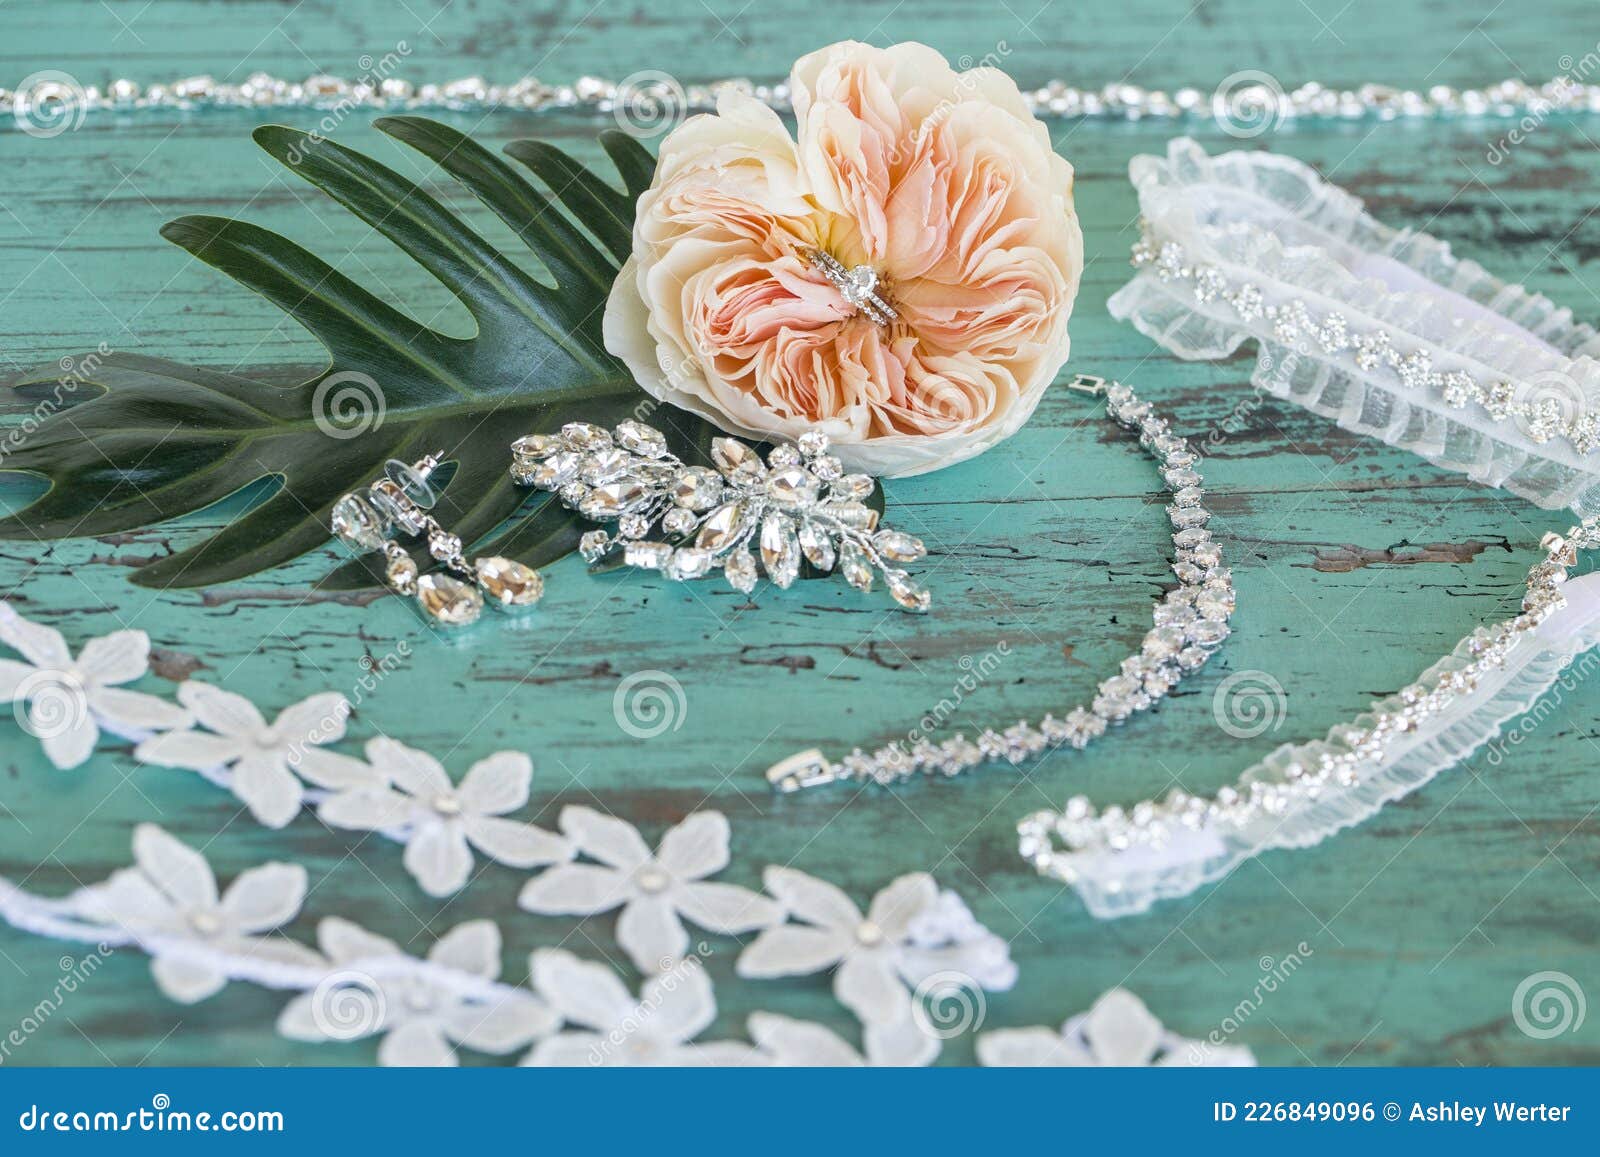 ring details in a wedding flower.